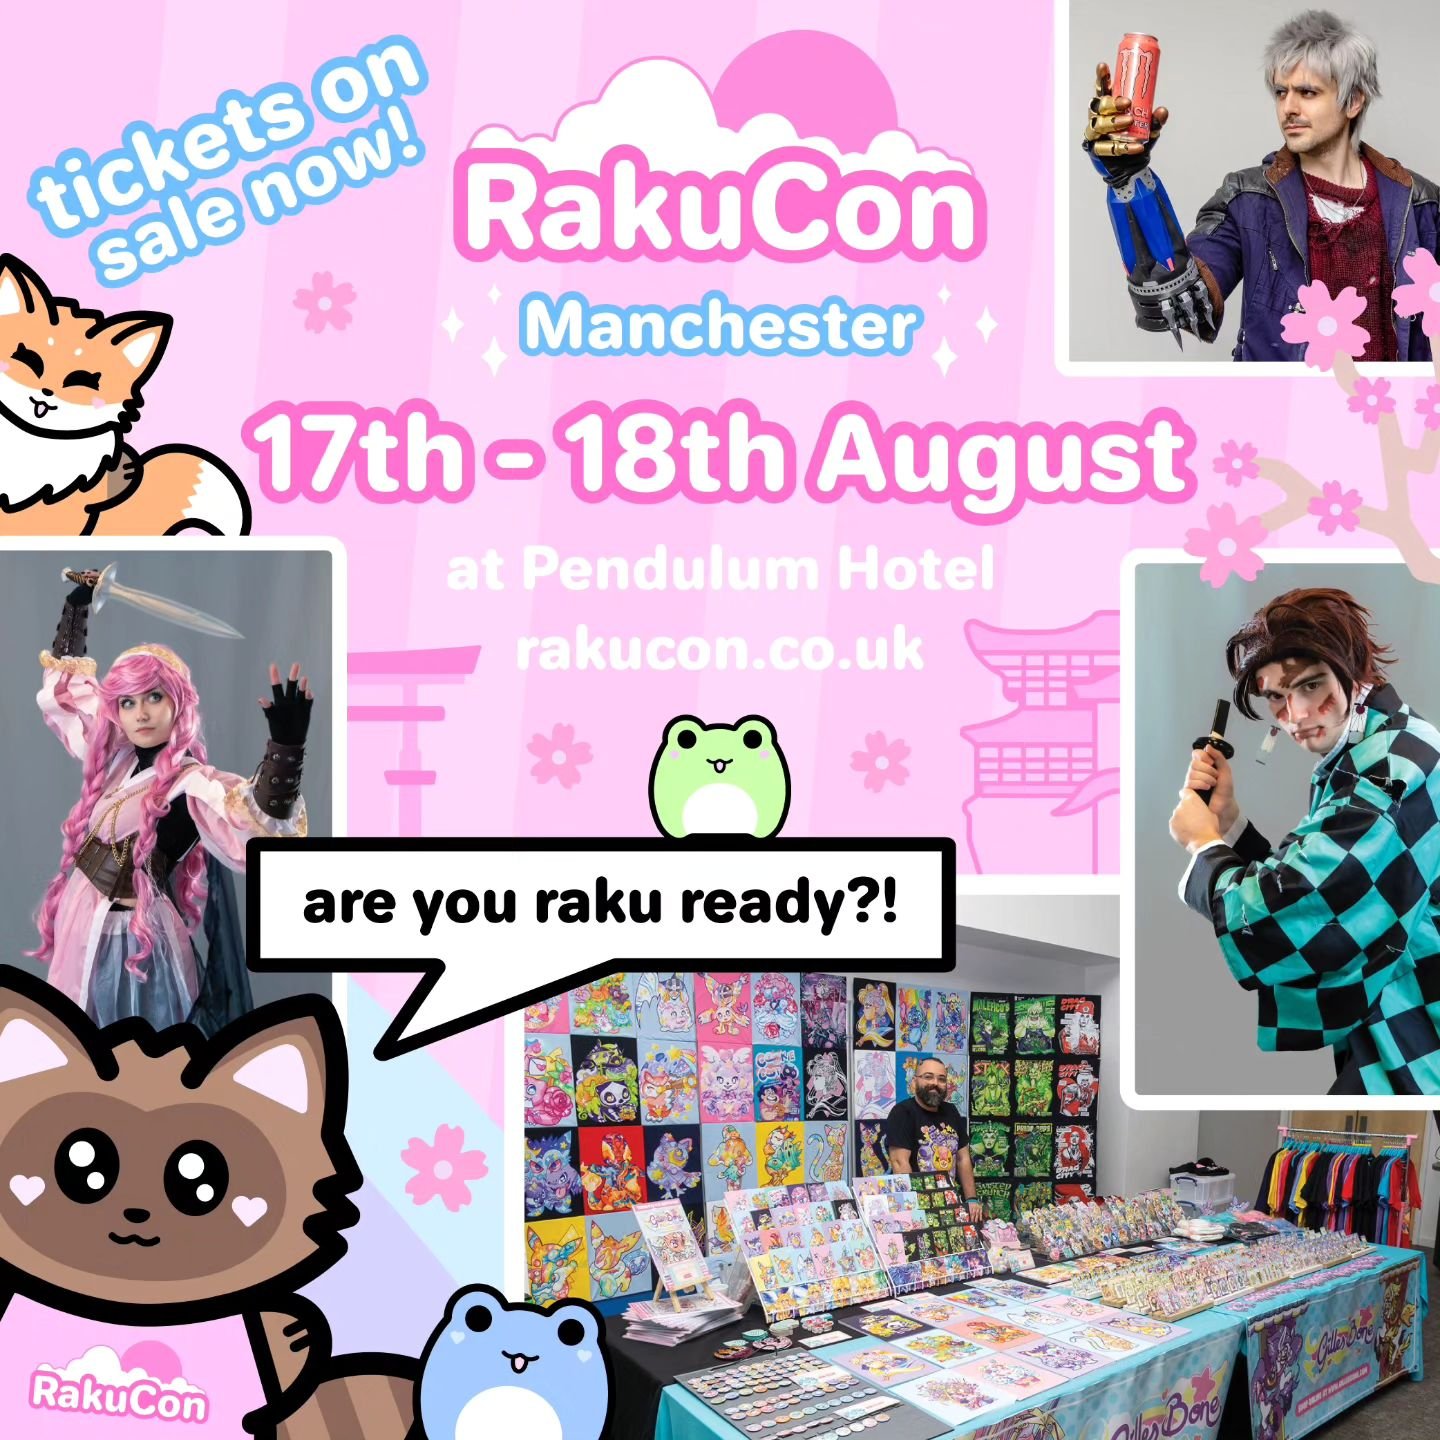 Don't miss out! RakuCon - a Japanese popular culture convention returns to Manchester this August 17th - 18th! ✨🌸 Join us for amazing artists, incredible performances, panels, games and an exciting anime and emo themed after party with @otakudriveev